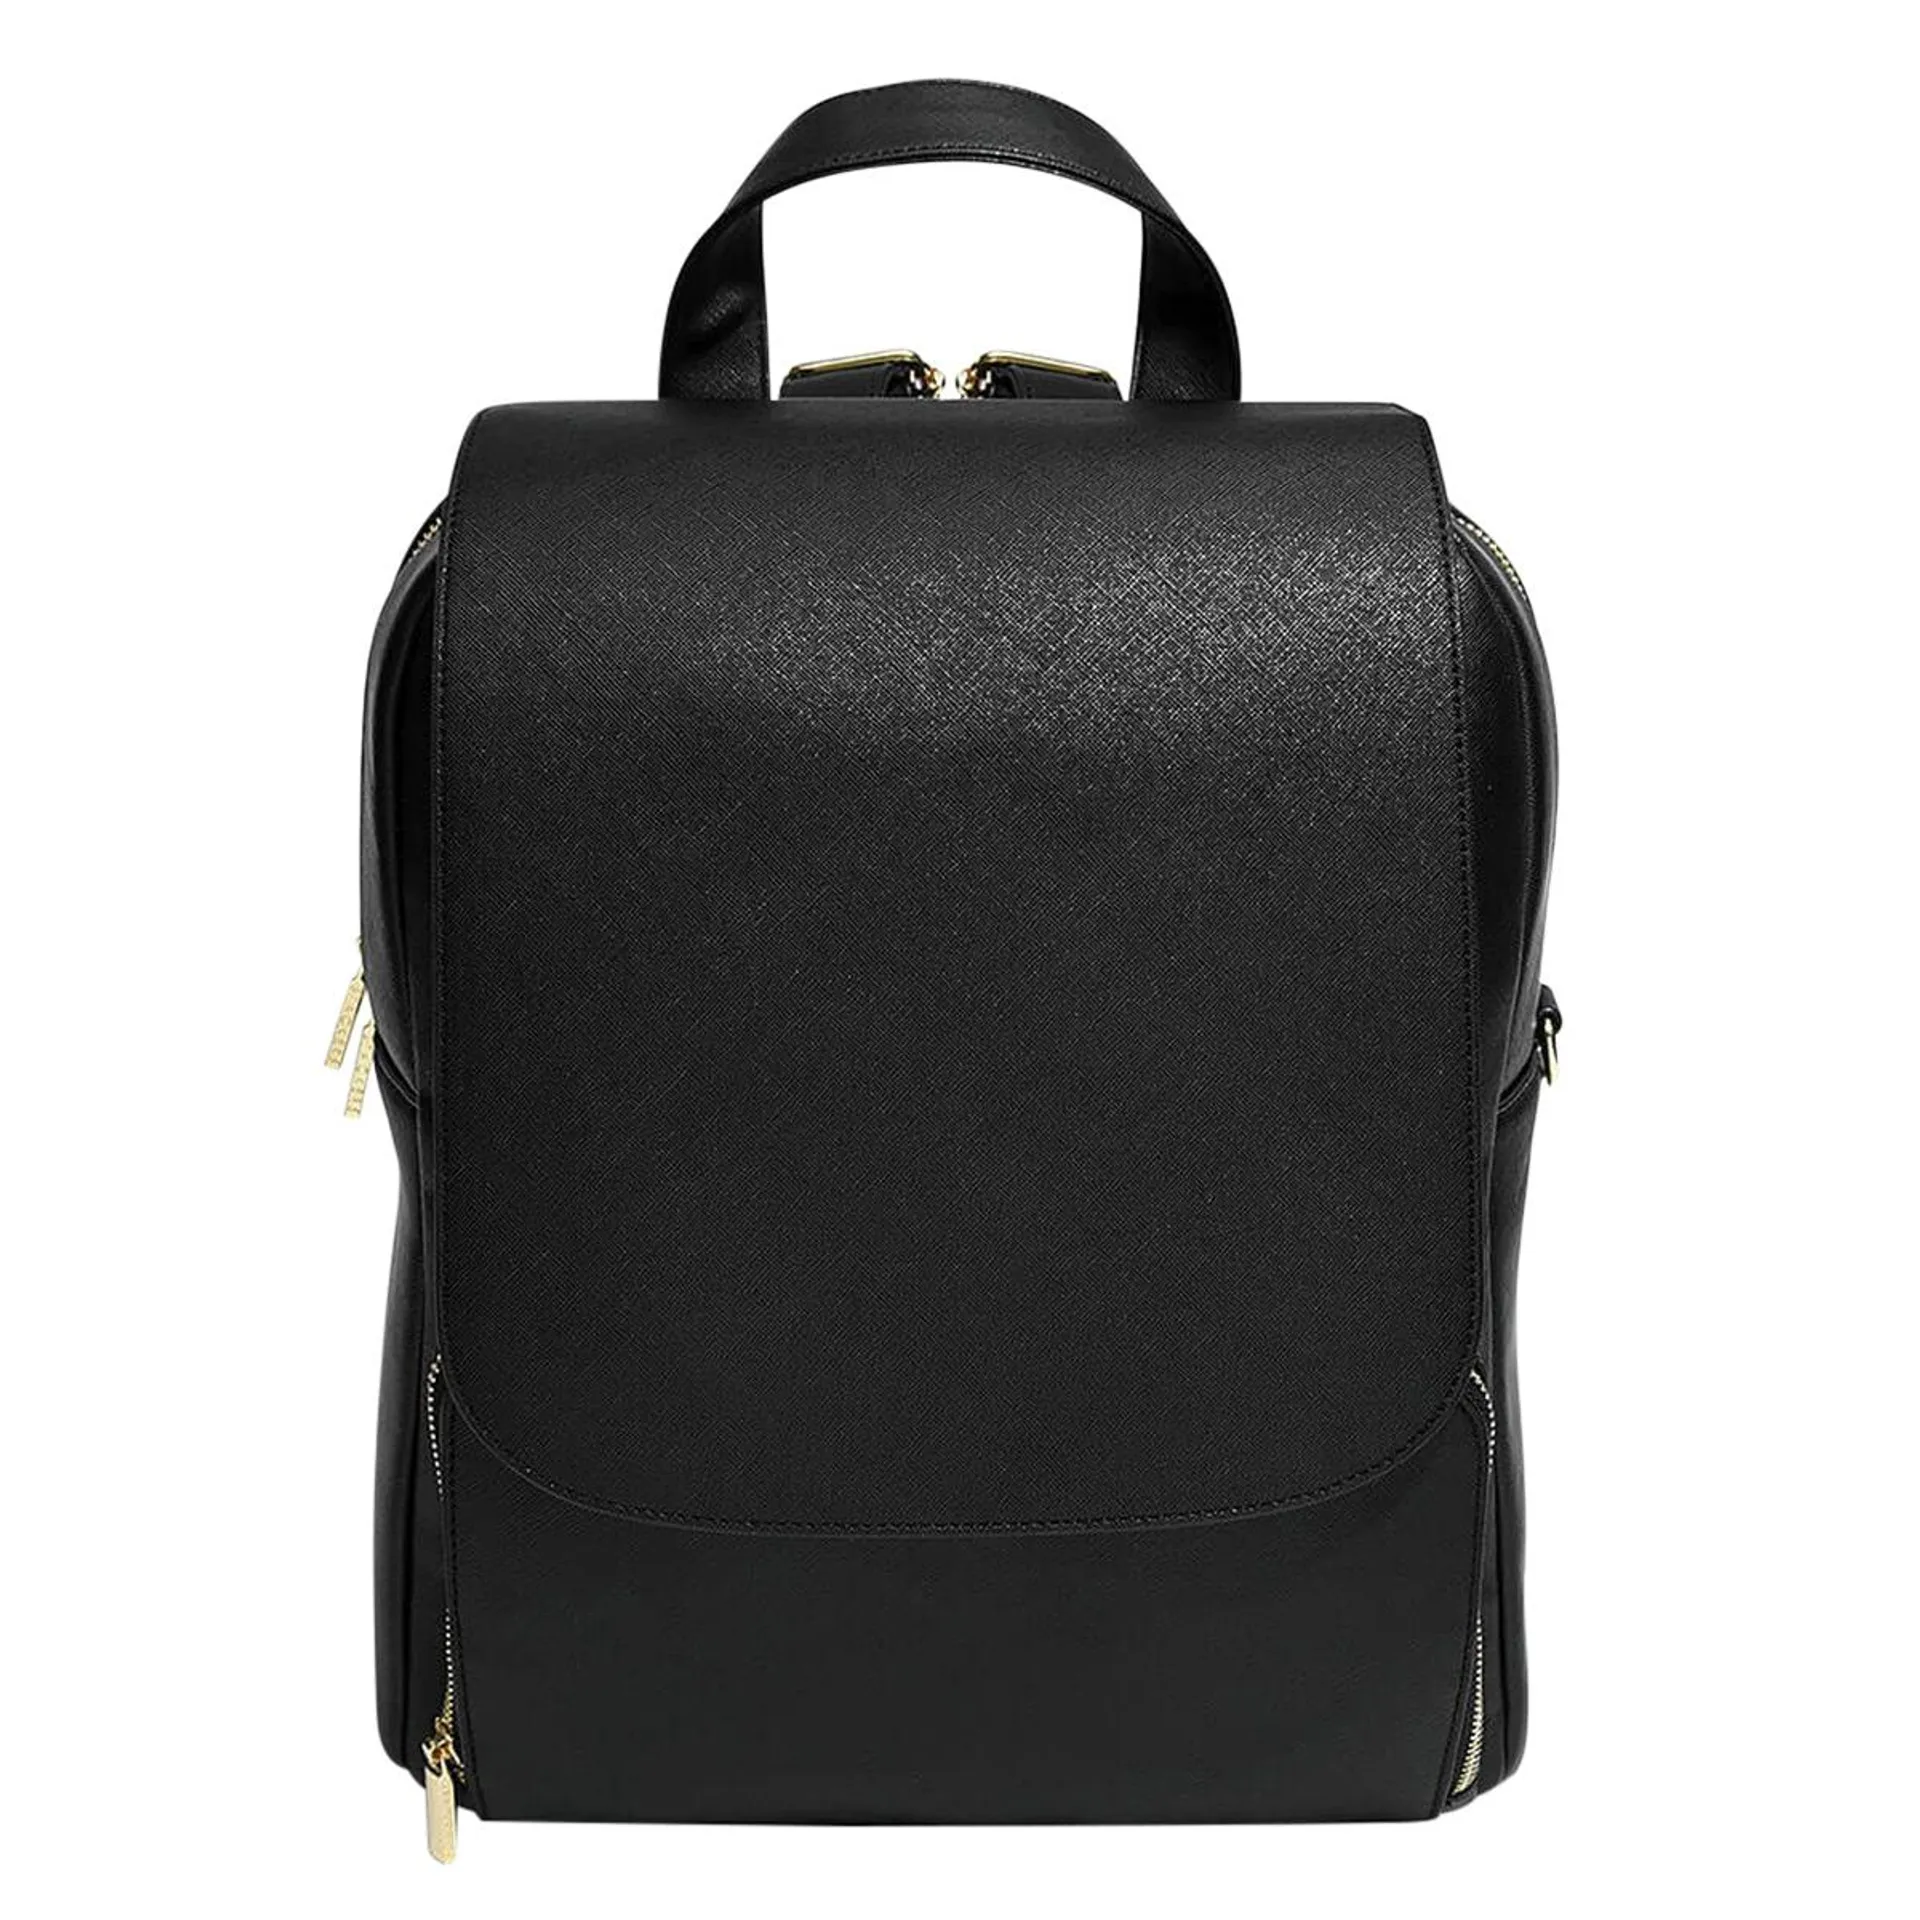 Stackers Laptop Backpack Black